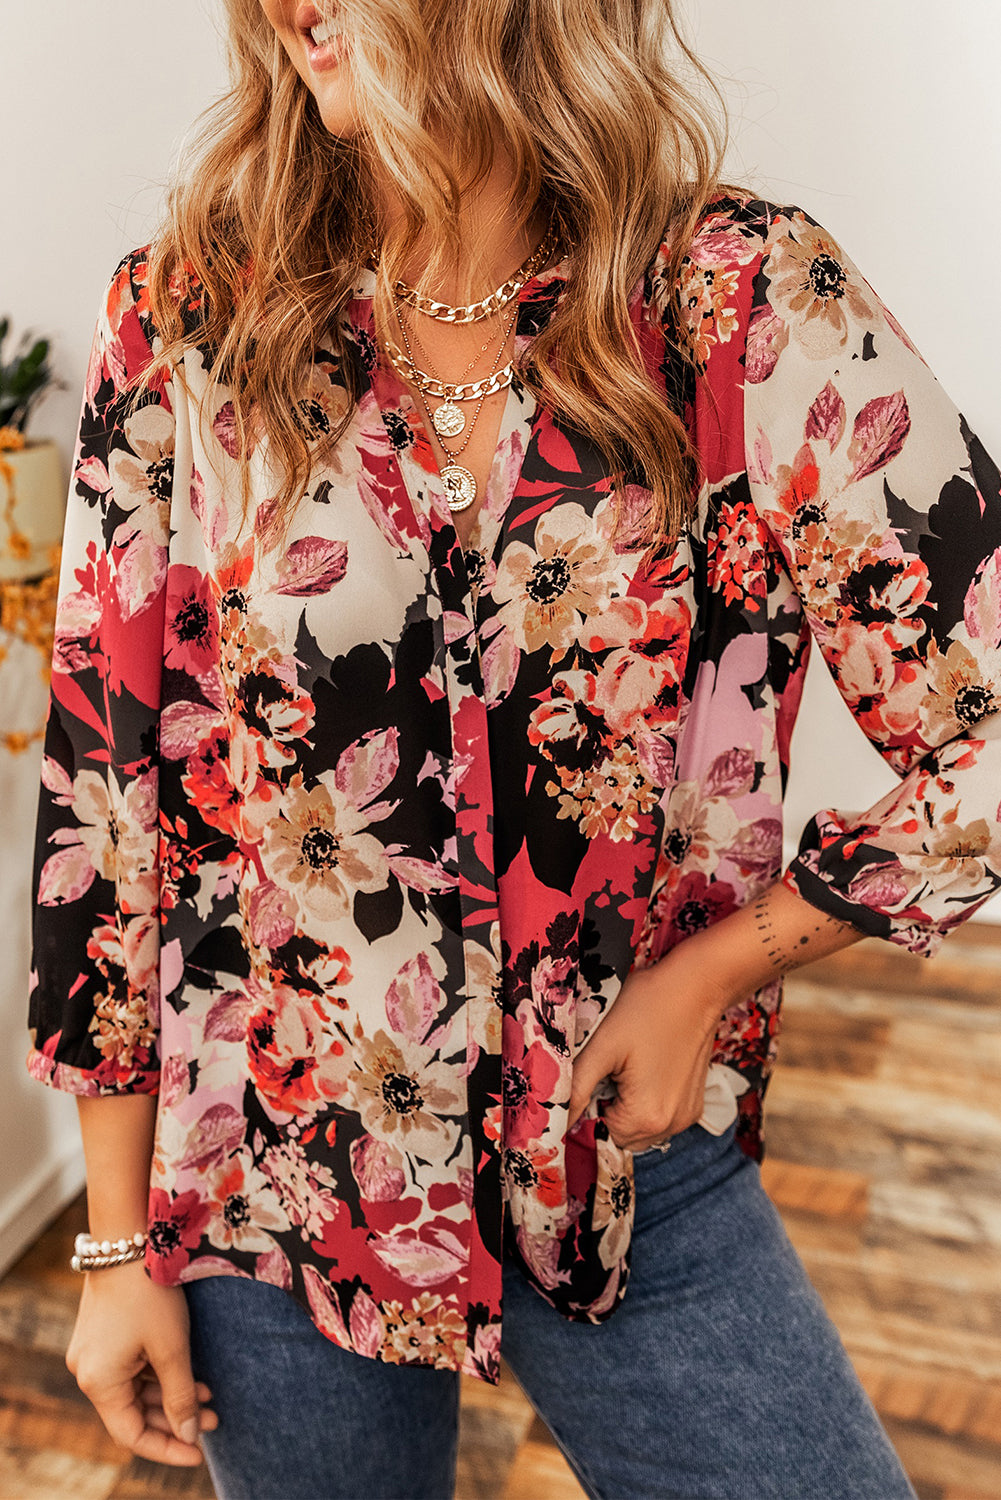 Tuscany Floral Print Top